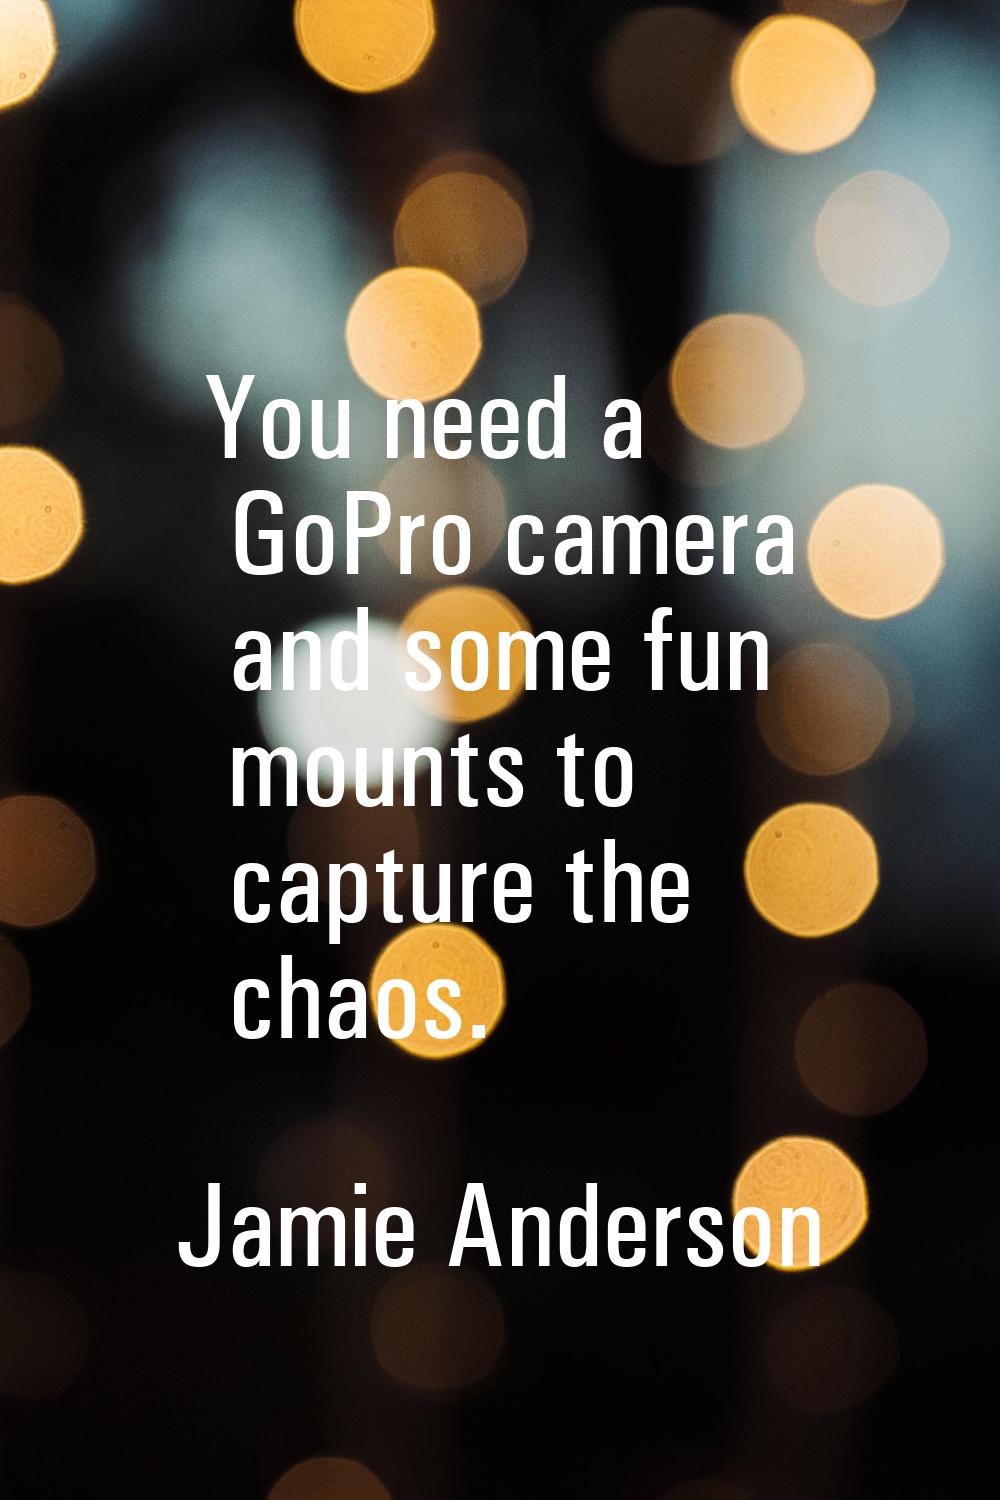 You need a GoPro camera and some fun mounts to capture the chaos.